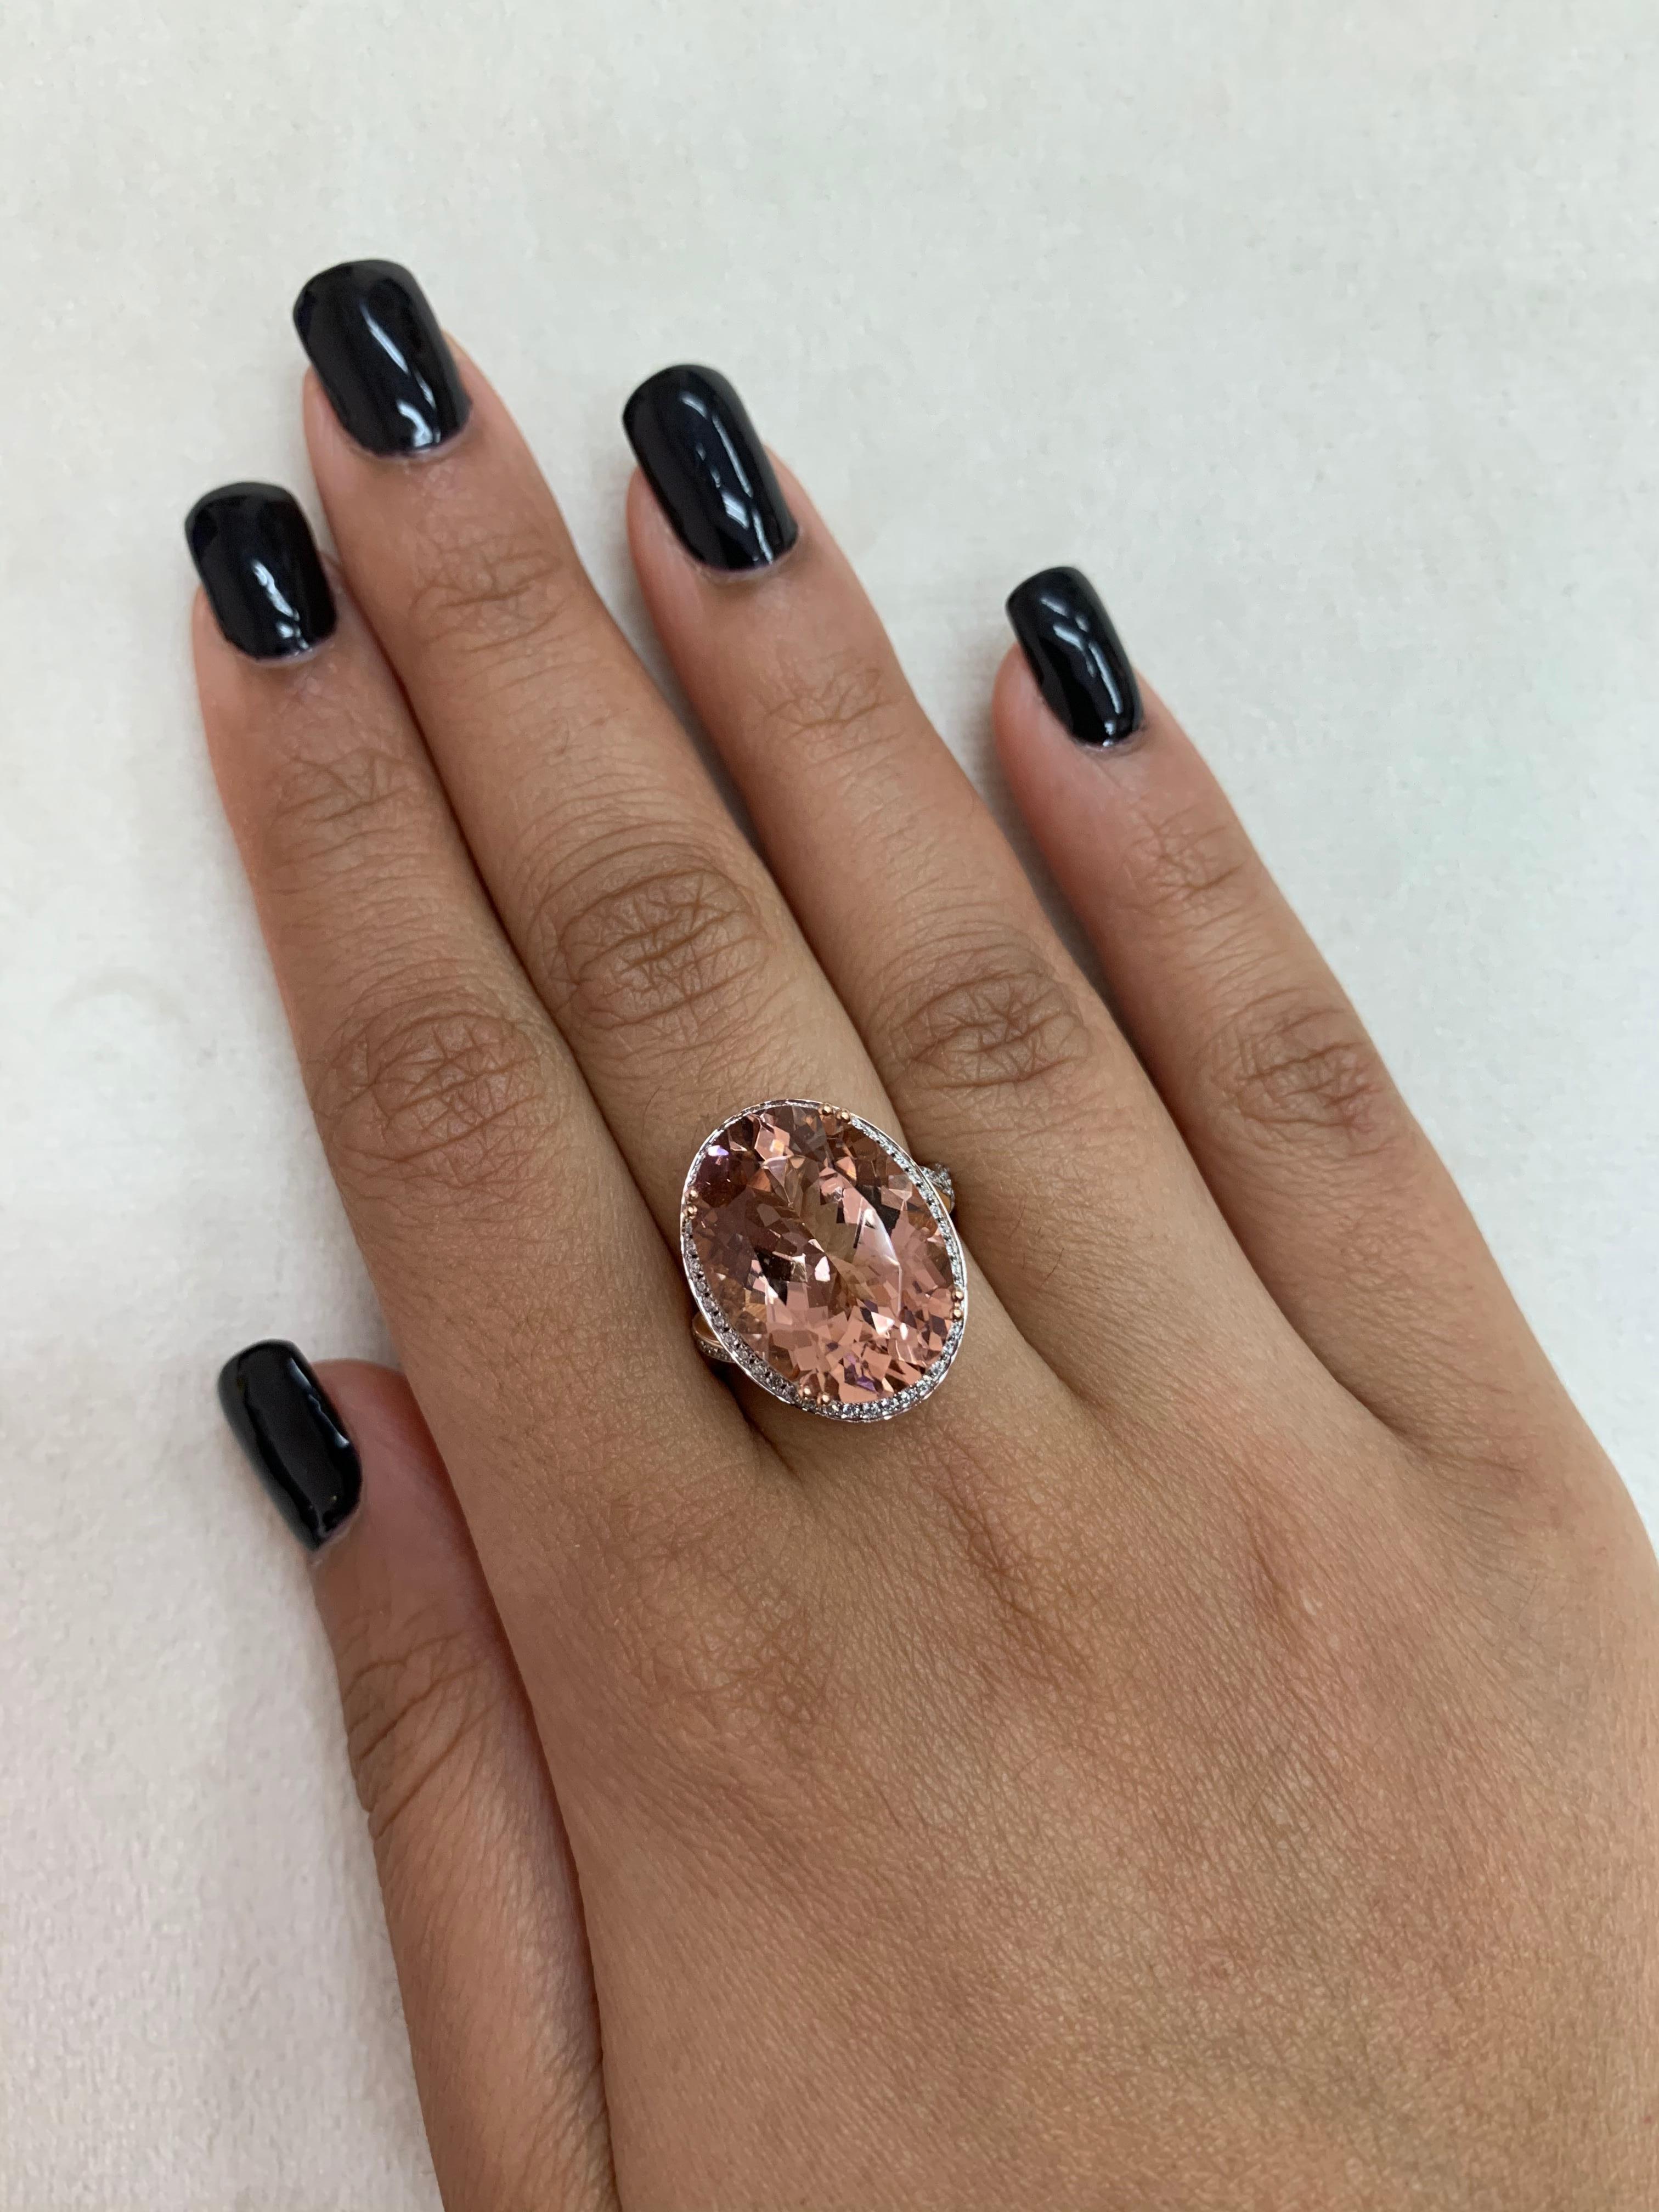 This collection features an array of magnificent morganites! Accented with diamonds these rings are made in rose gold and present a classic yet elegant look. 

Classic morganite ring in 18K rose gold with diamonds. 

Morganite: 12.51 carat oval